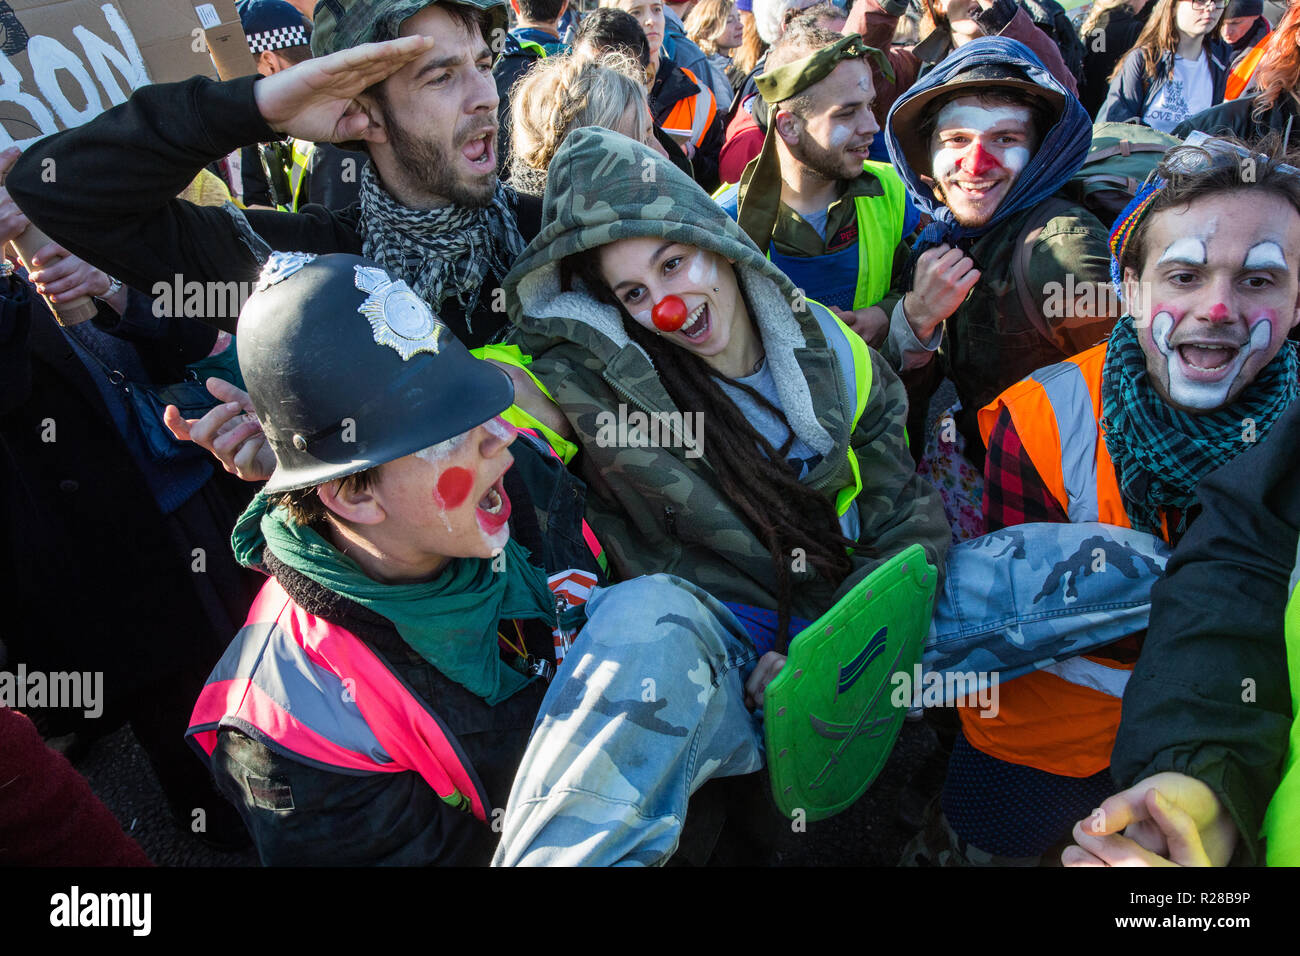 London, UK. 17th November, 2018police officers . Clowns from Clandestine Insurgent Rebel Clown Army (CIRCA) follow police officers arrestingt a man after environmental campaigners from Extinction Rebellion blocked Lambeth Bridge, one of five bridges blocked in central London, as part of a Rebellion Day event to highlight 'criminal inaction in the face of climate change catastrophe and ecological collapse' by the UK Government as part of a programme of civil disobedience during which scores of campaigners have been arrested. Credit: Mark Kerrison/Alamy Live News Stock Photo